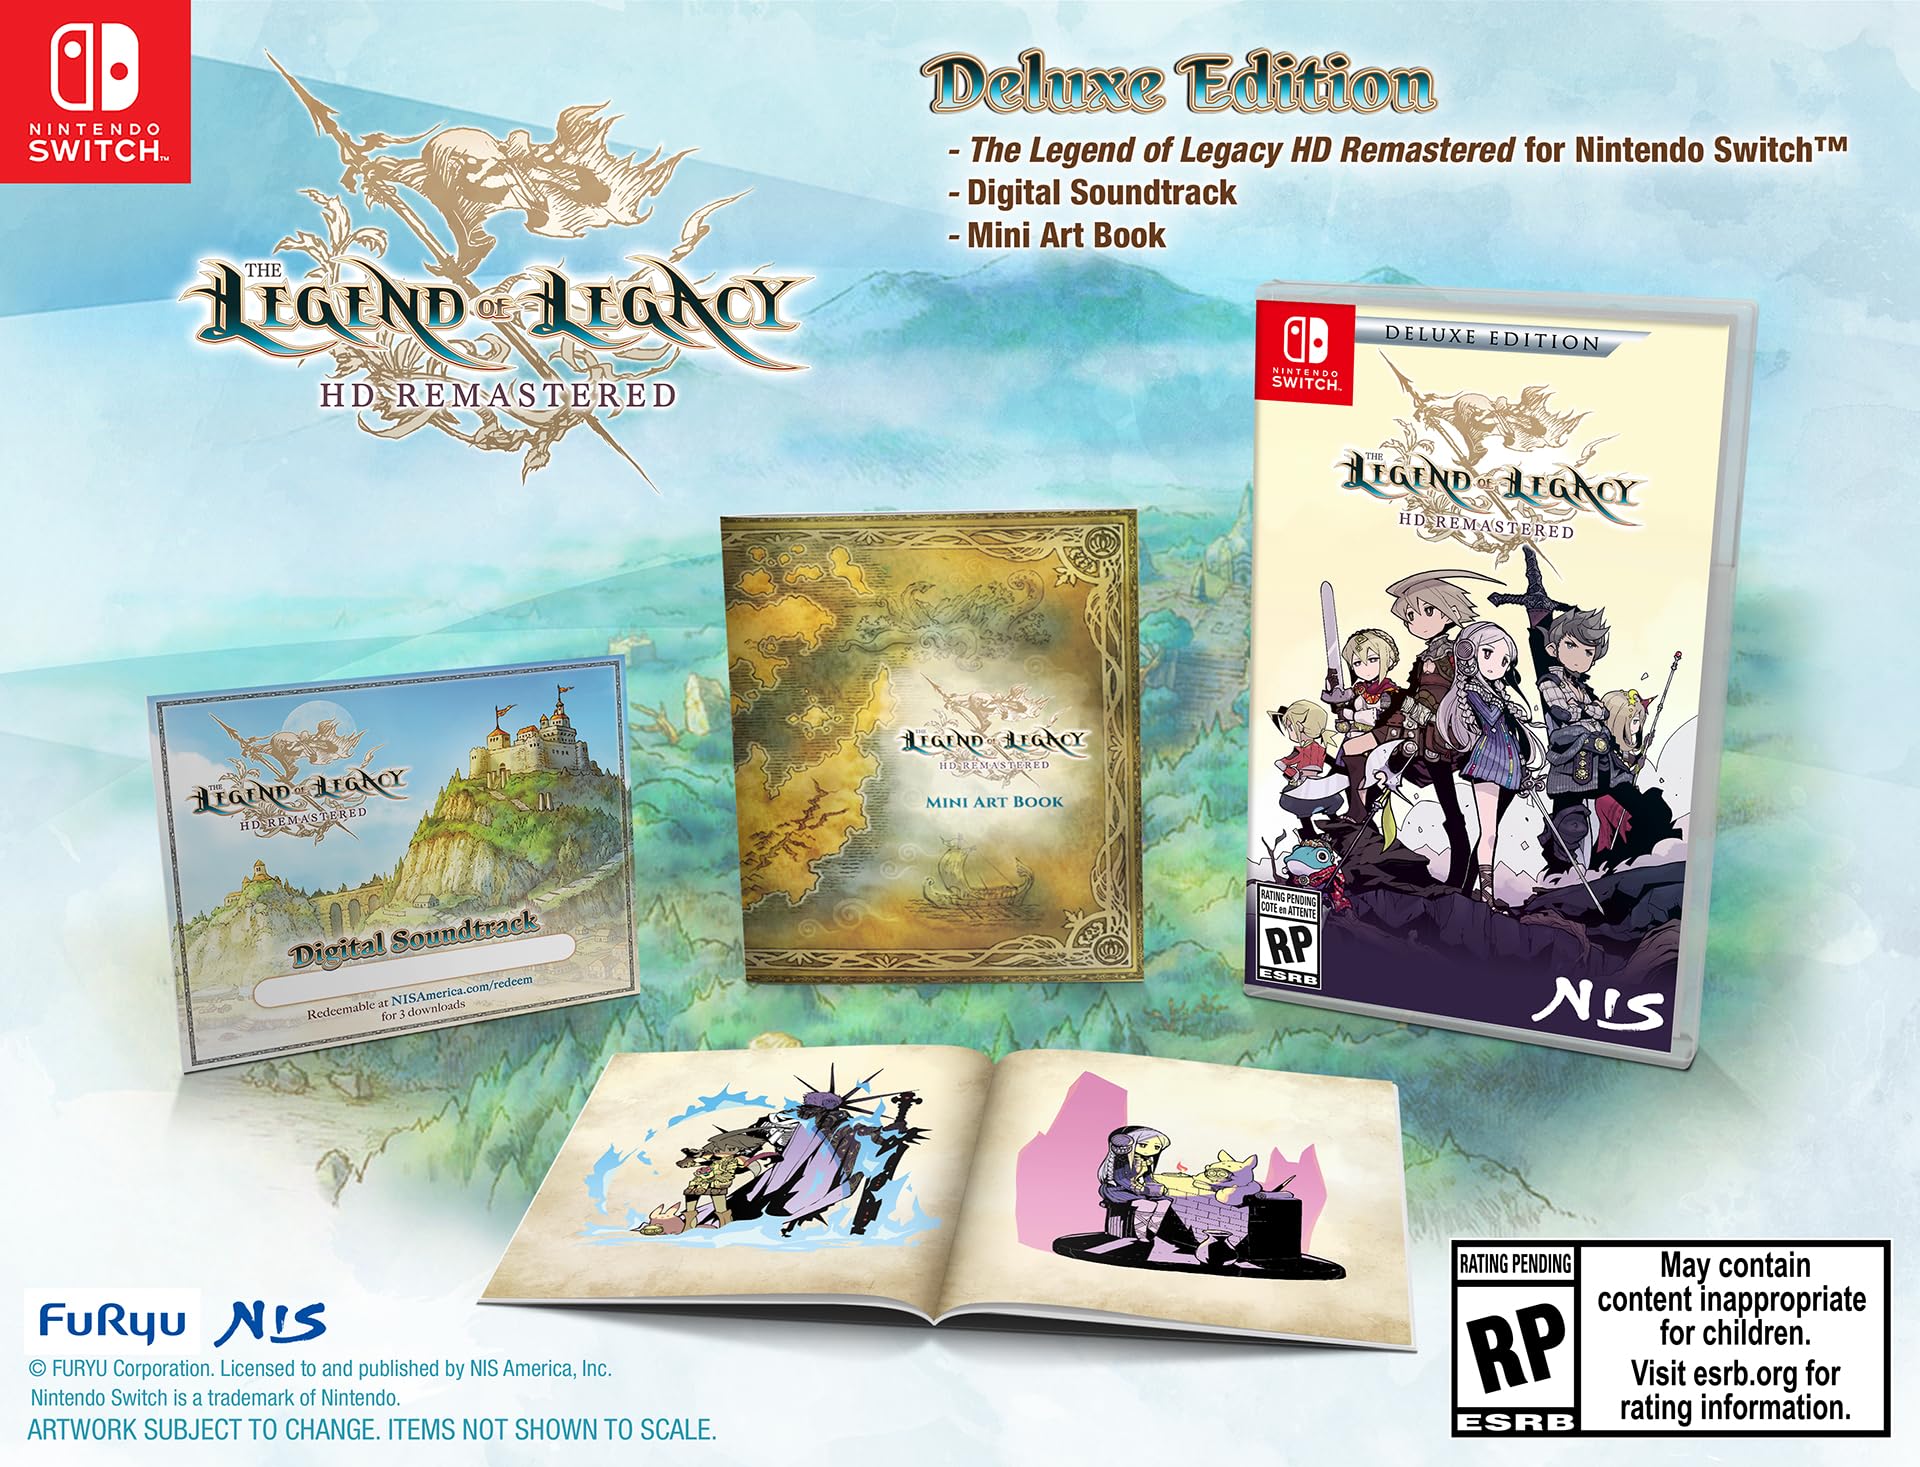 The Legend of Legacy HD Remastered: Deluxe Edition (Nintendo Switch, Physical) $40.49 + Free Shipping